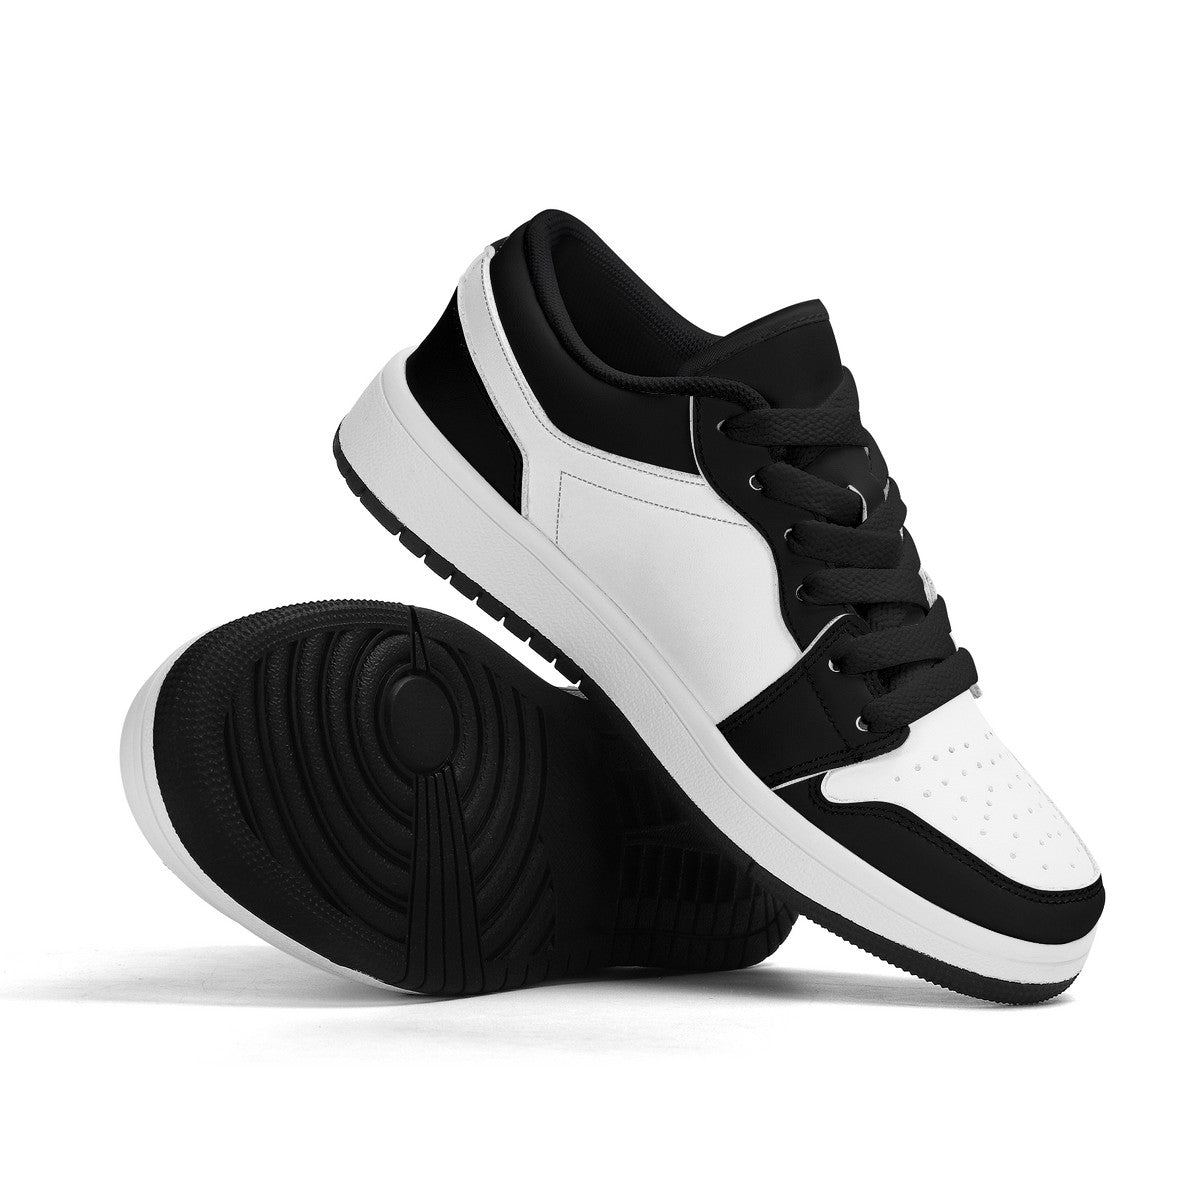 Personalize Your Own Kids Low-Top PU Leather Sneakers-Black and White